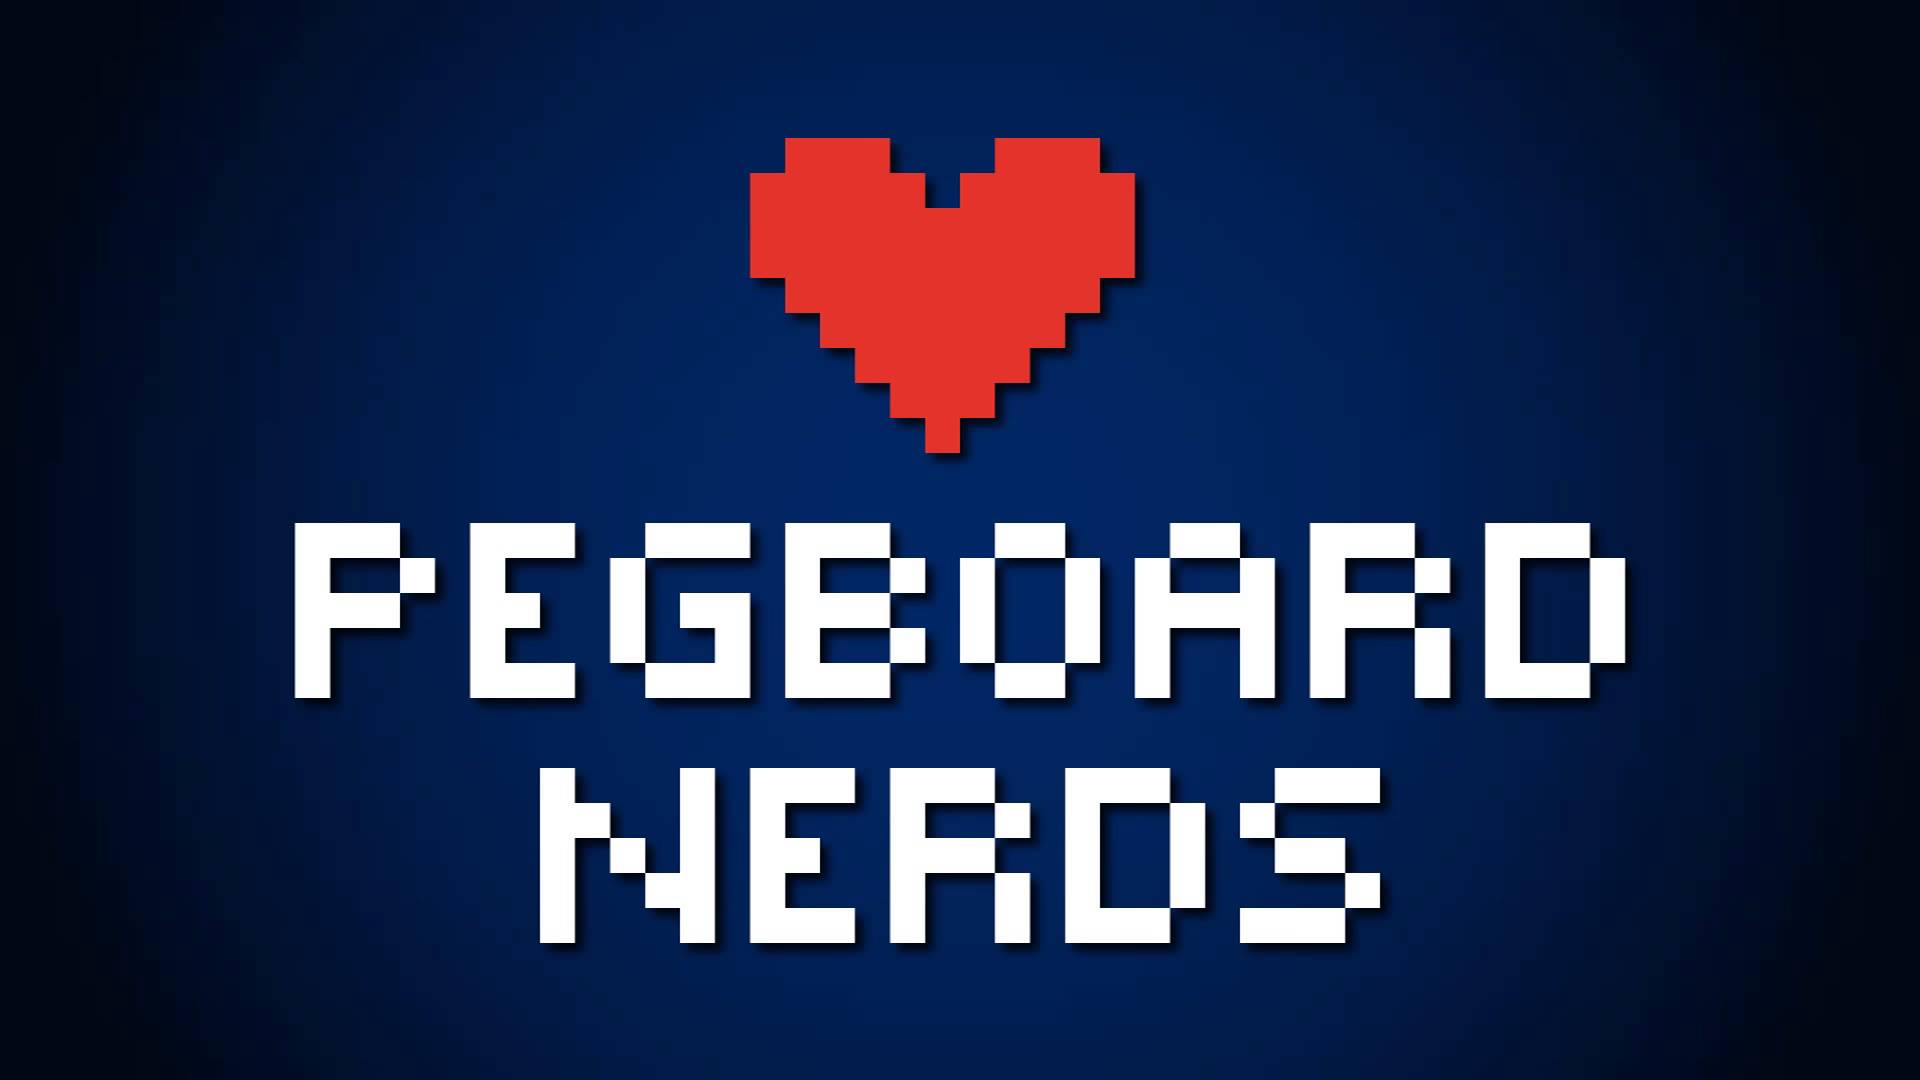 Pegboard Nerds - Party Freaks (feat. Anna Yvette) [Electro House]